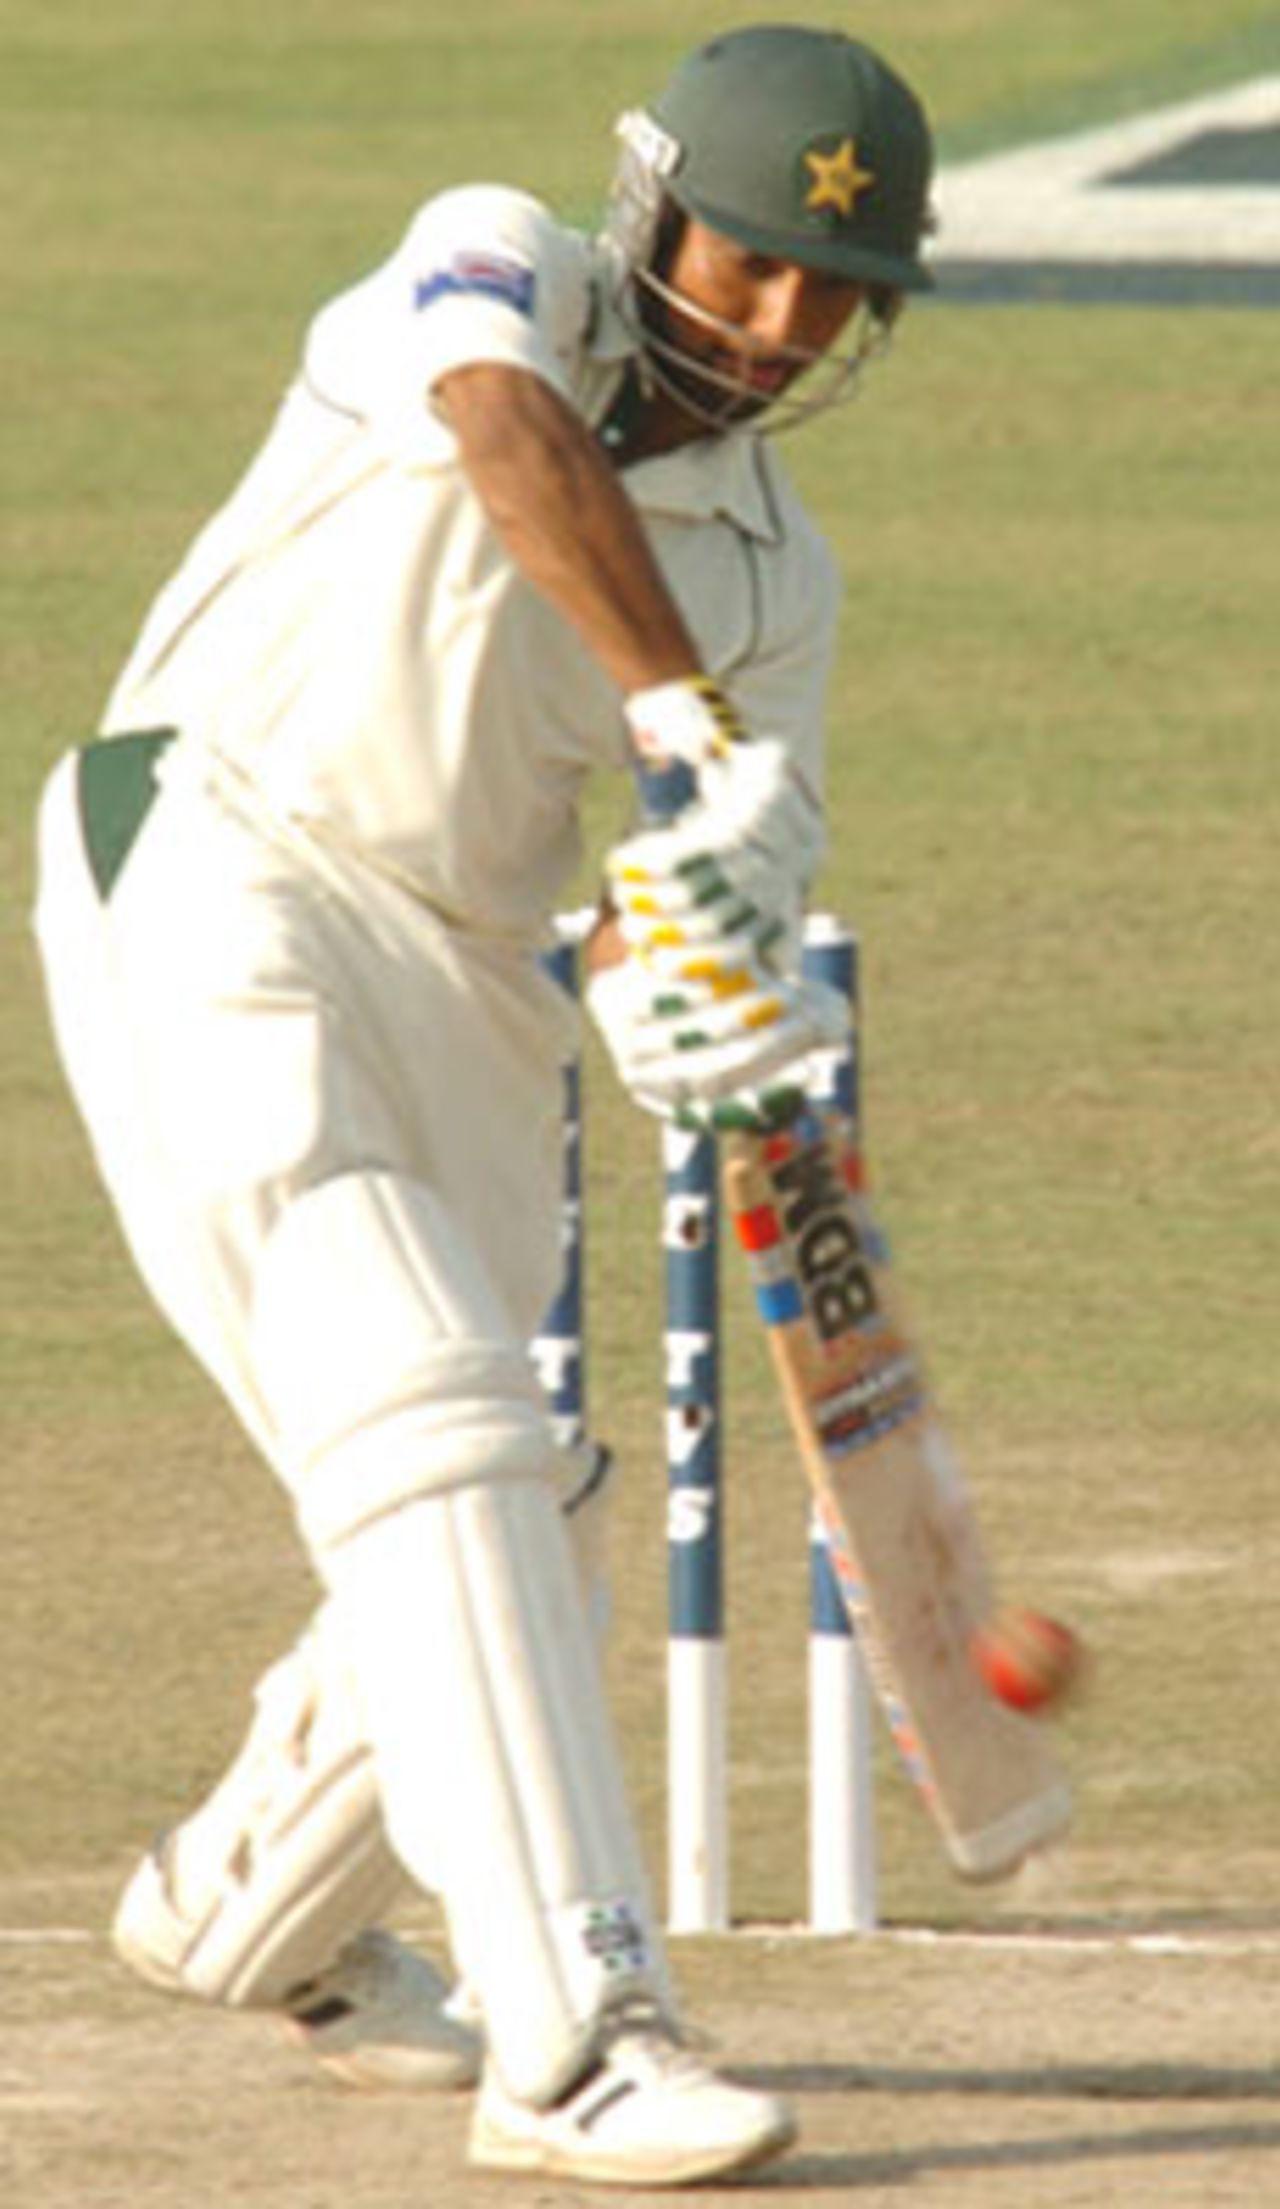 While most Pakistan batsmen could not battle the accuracy and aggression of Anil Kumble, one man, Asim Kamal, who is having a very good tour of India, stood amidst the ruins once again and compiled a stroke-filled fifty., 2nd Test: India v Pakistan at Kolkata, 16-20 Mar 2005